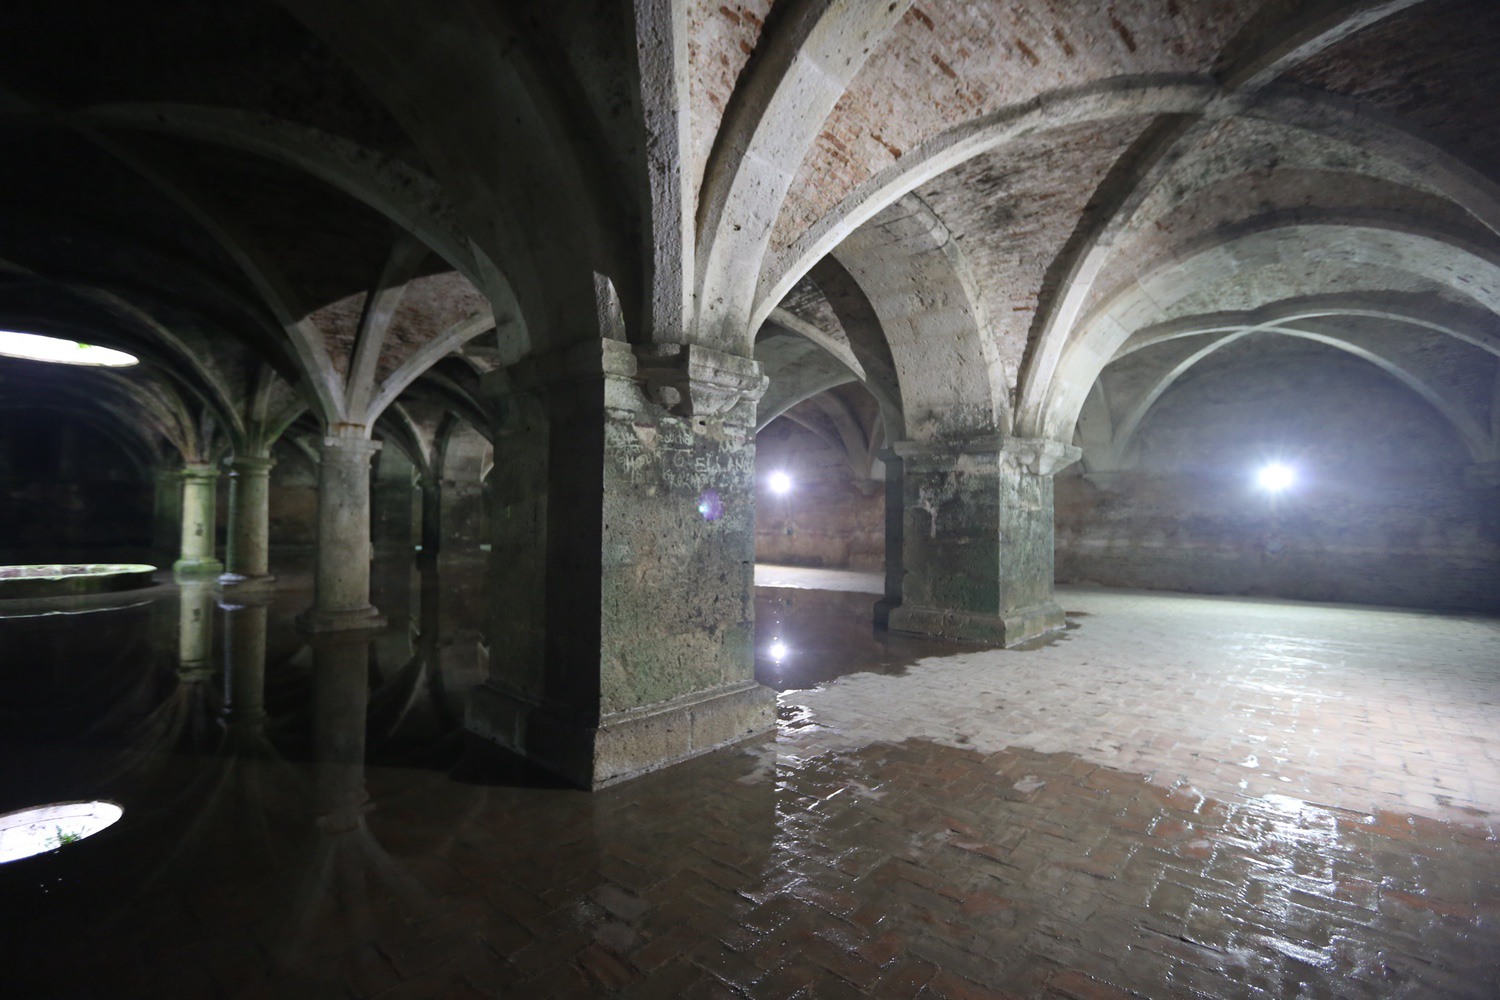 Cistern - Interior with piers in the foreground